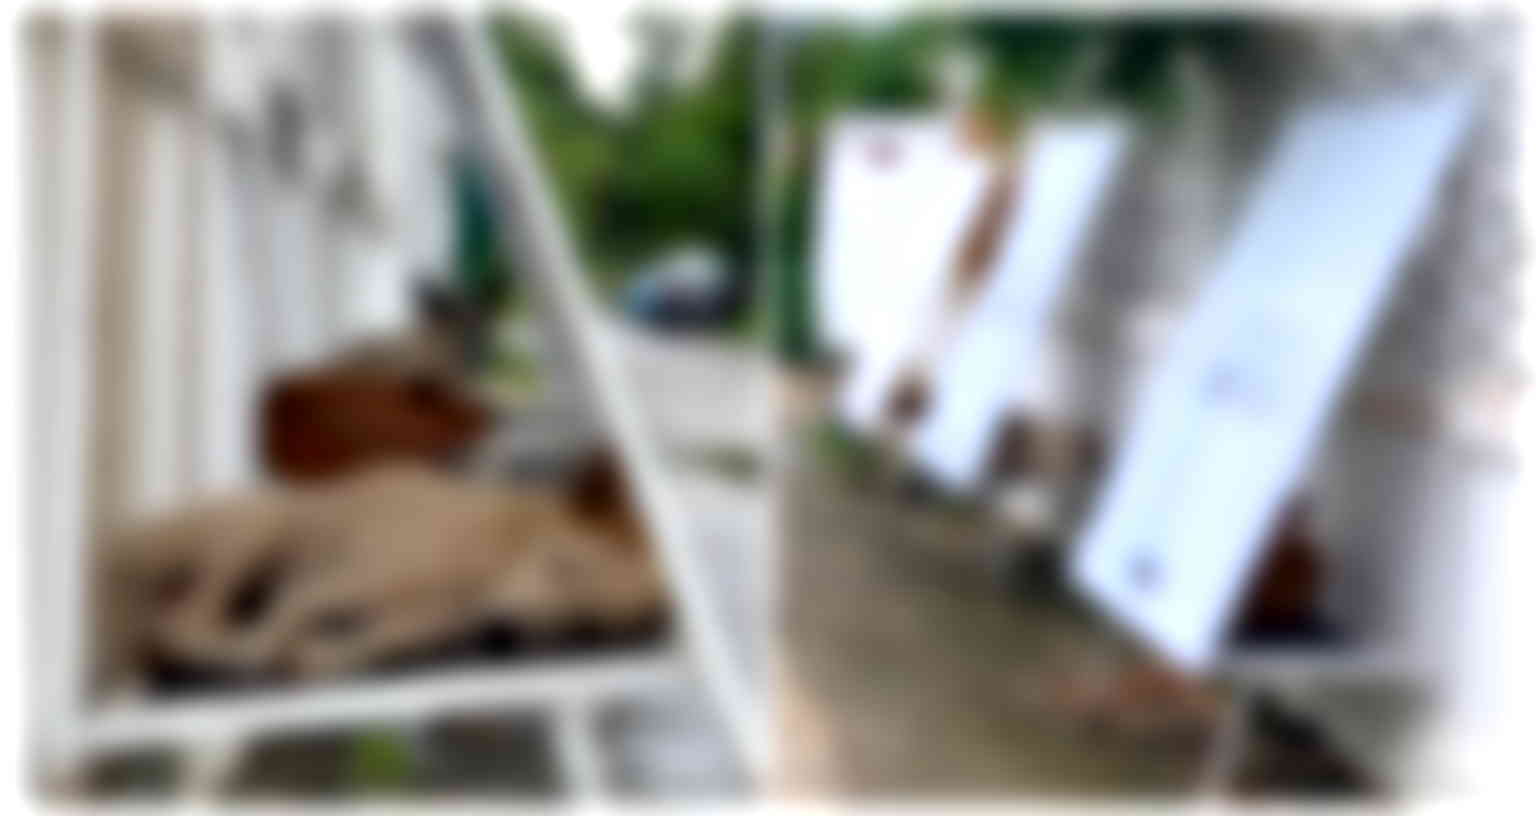 Thai student turns discarded billboards into shelters for stray dogs